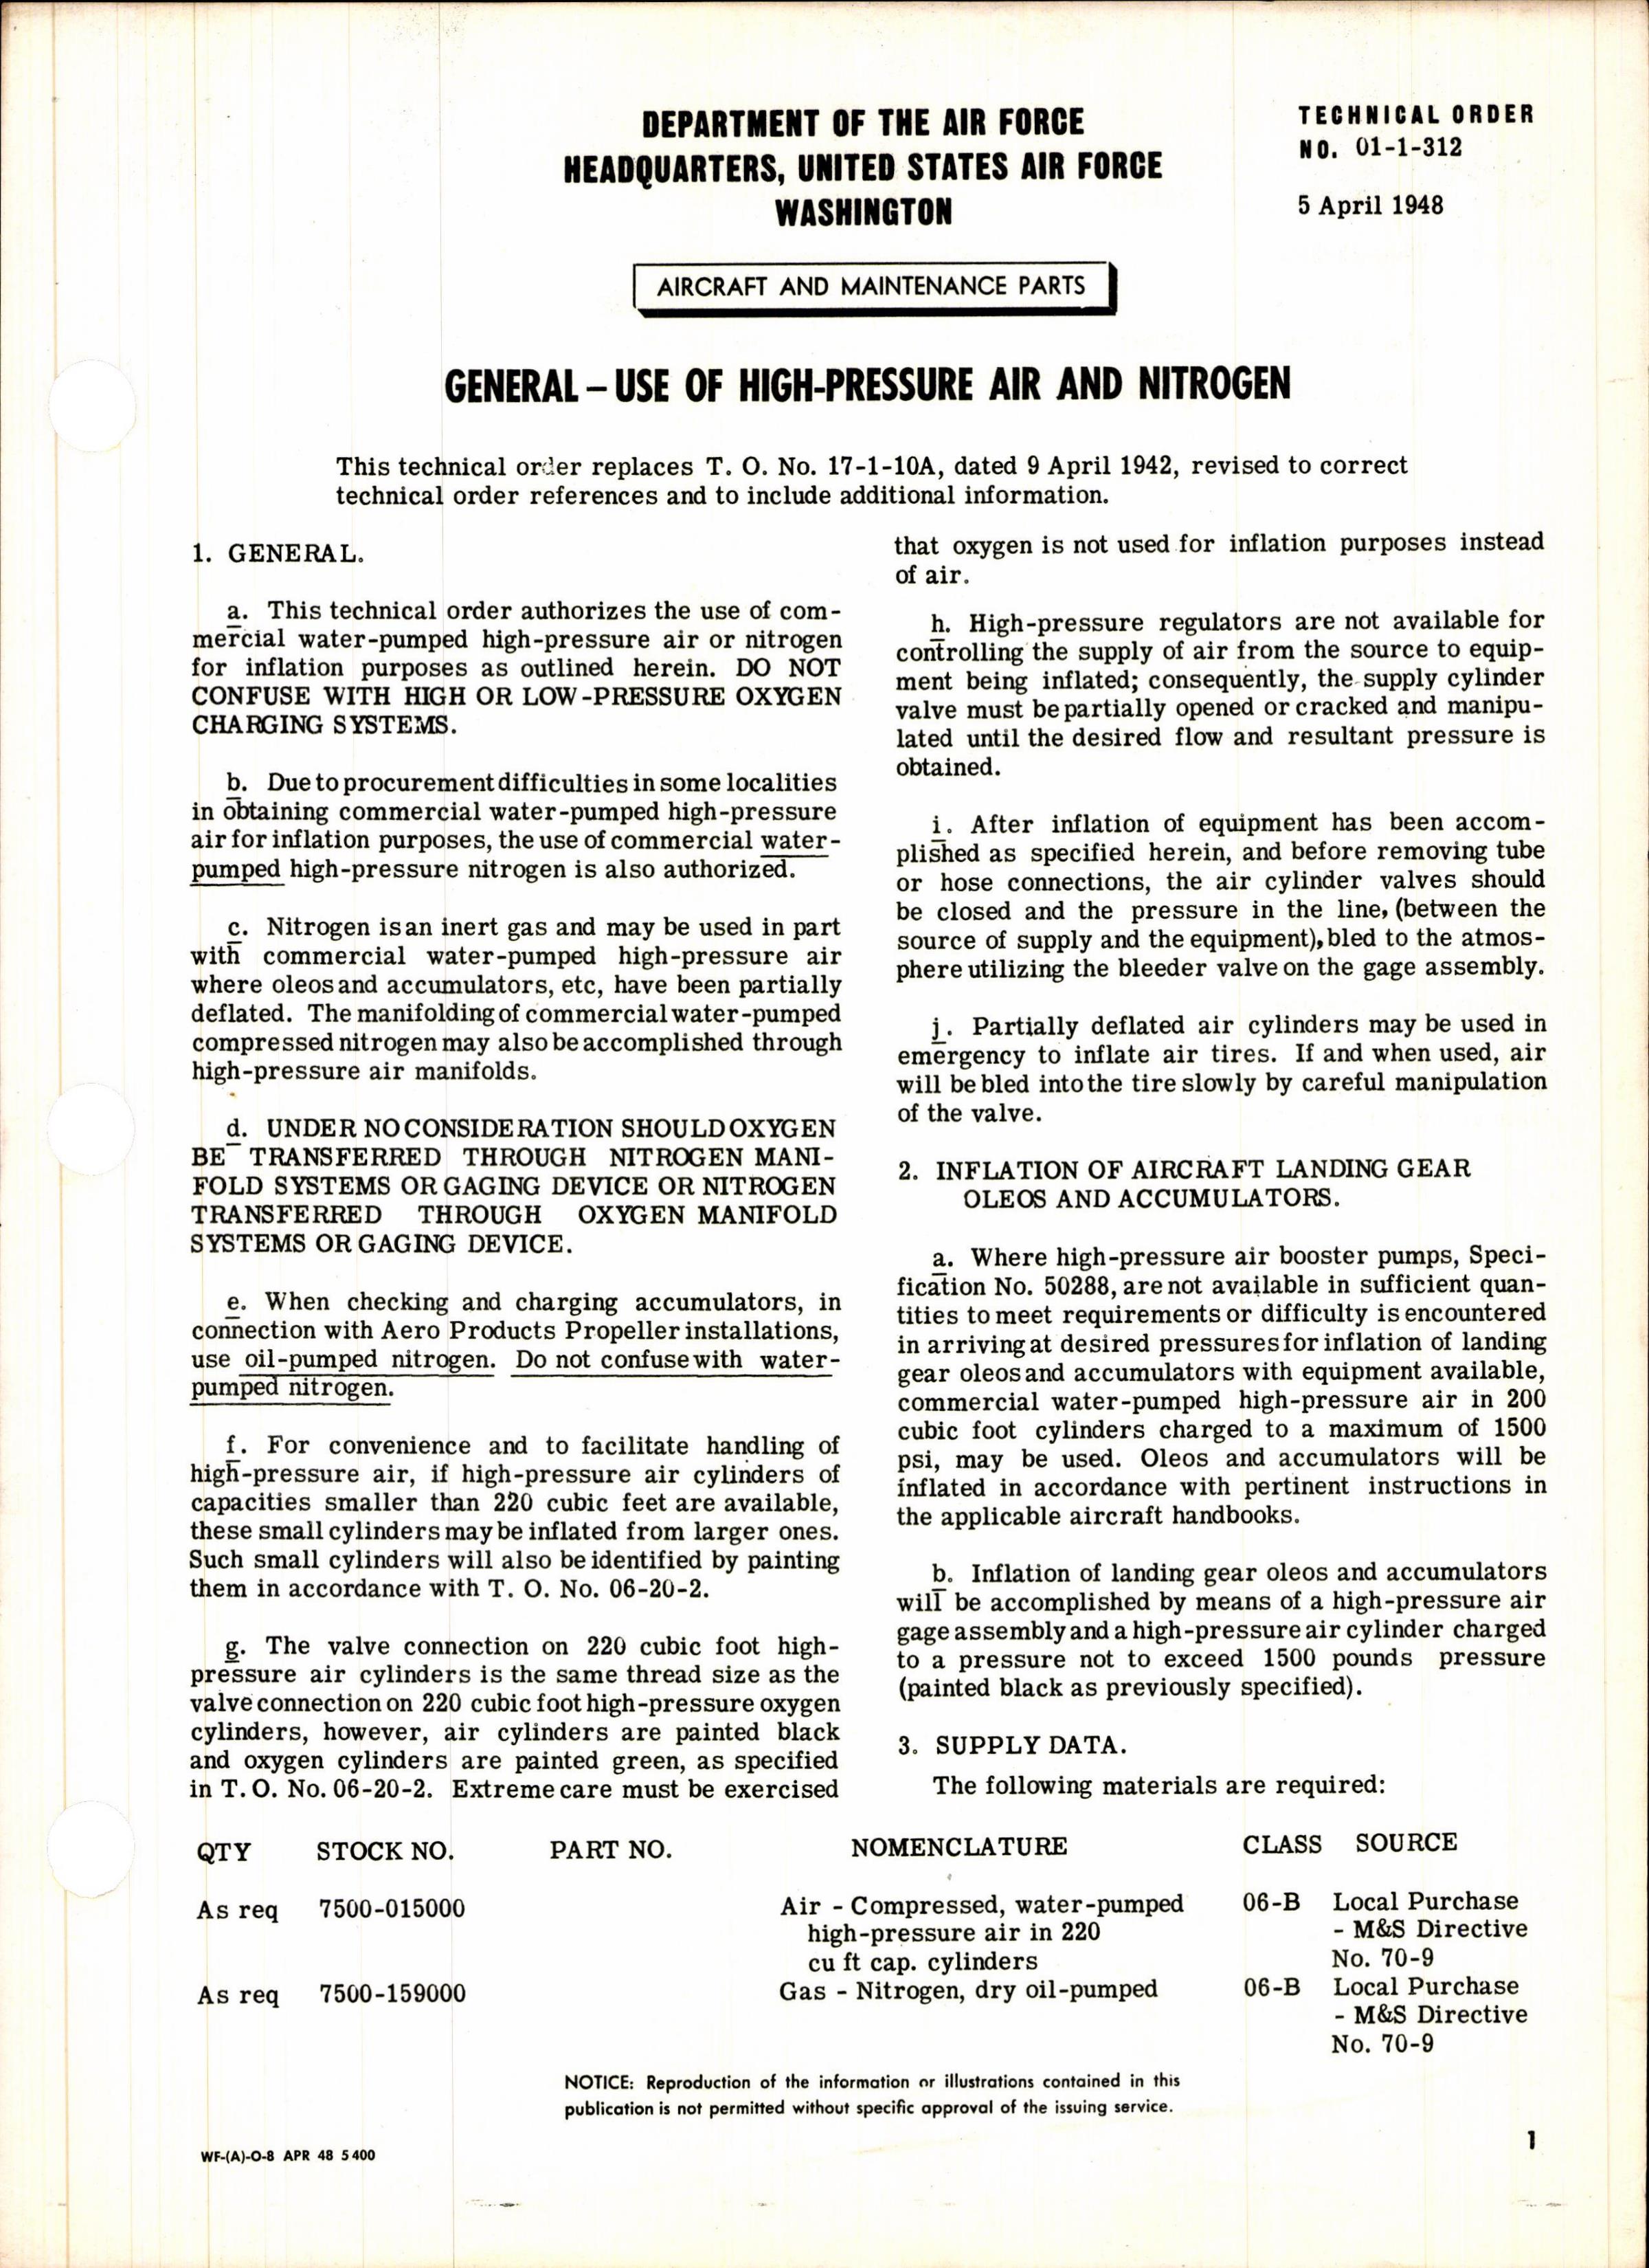 Sample page 1 from AirCorps Library document: Use of High-Pressure Air and Nitrogen